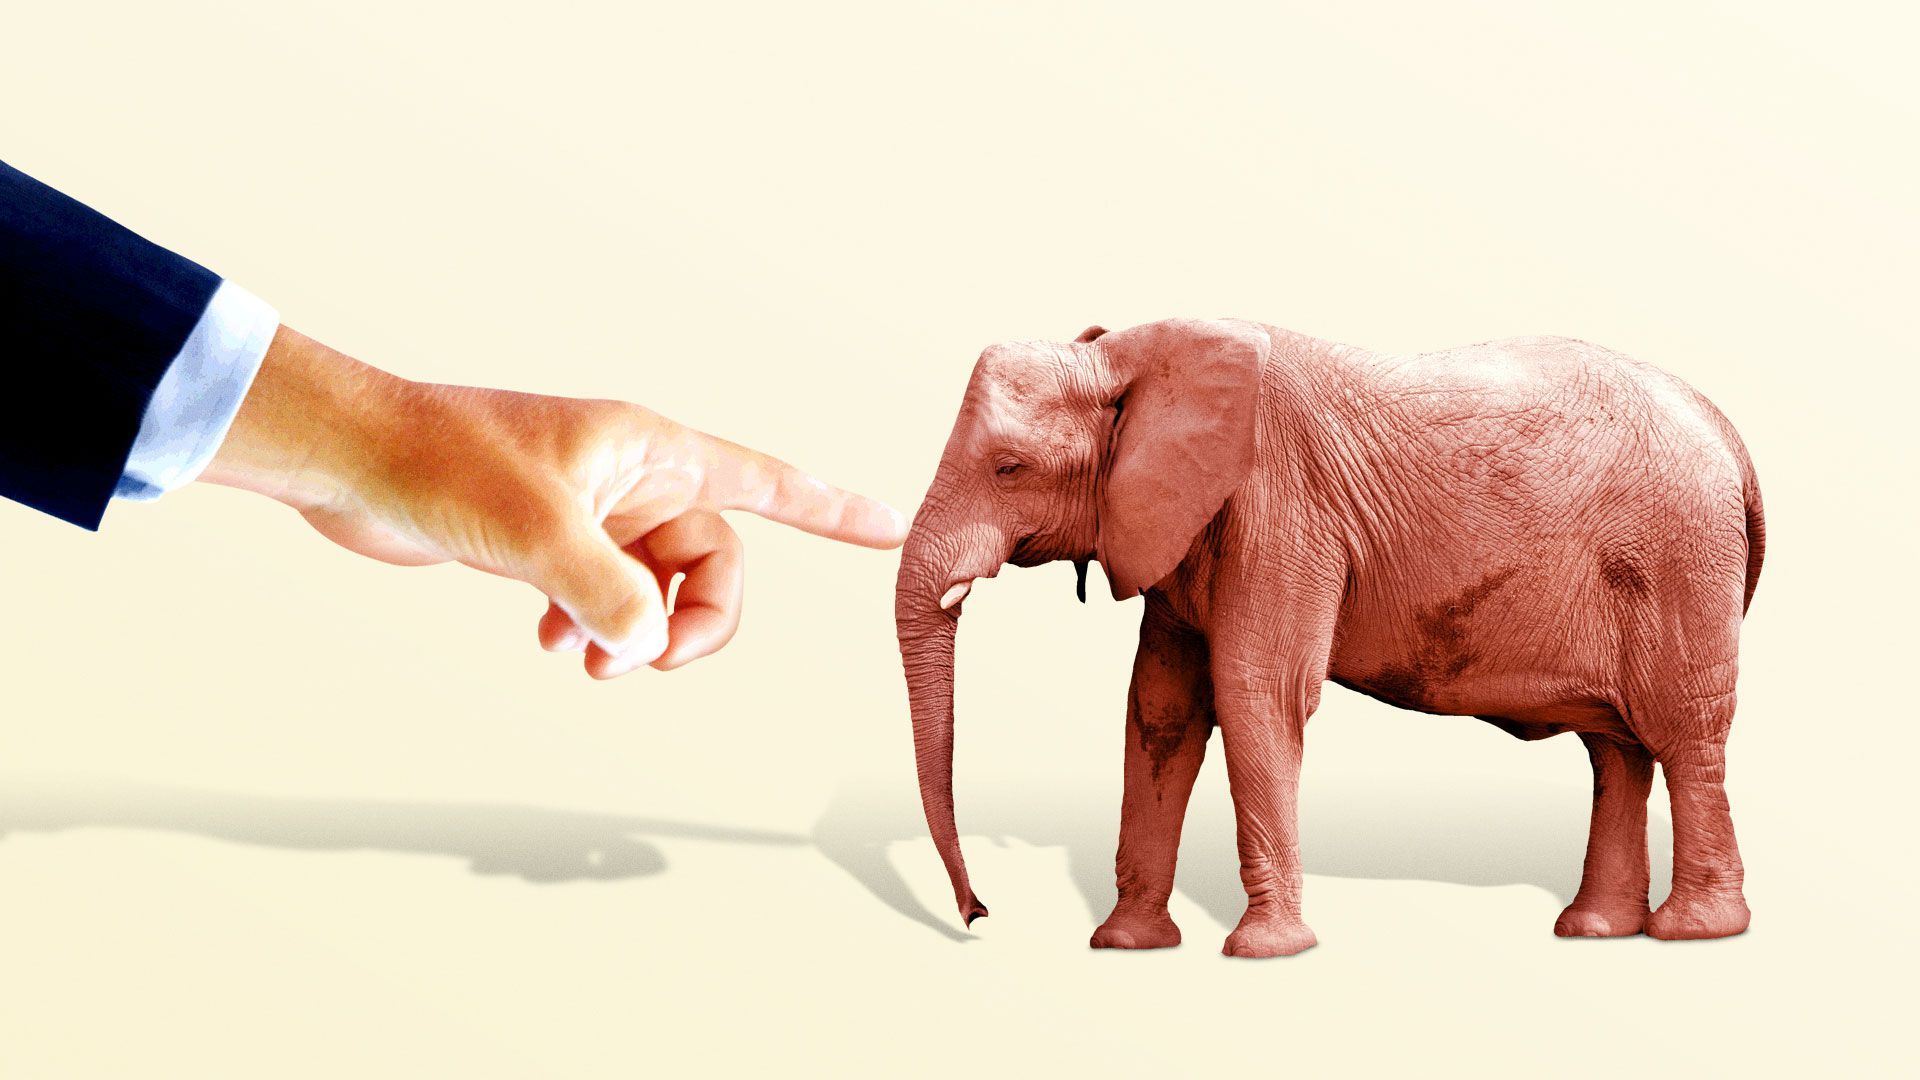 Illustration of a suited hand poking an elephant with it's finger